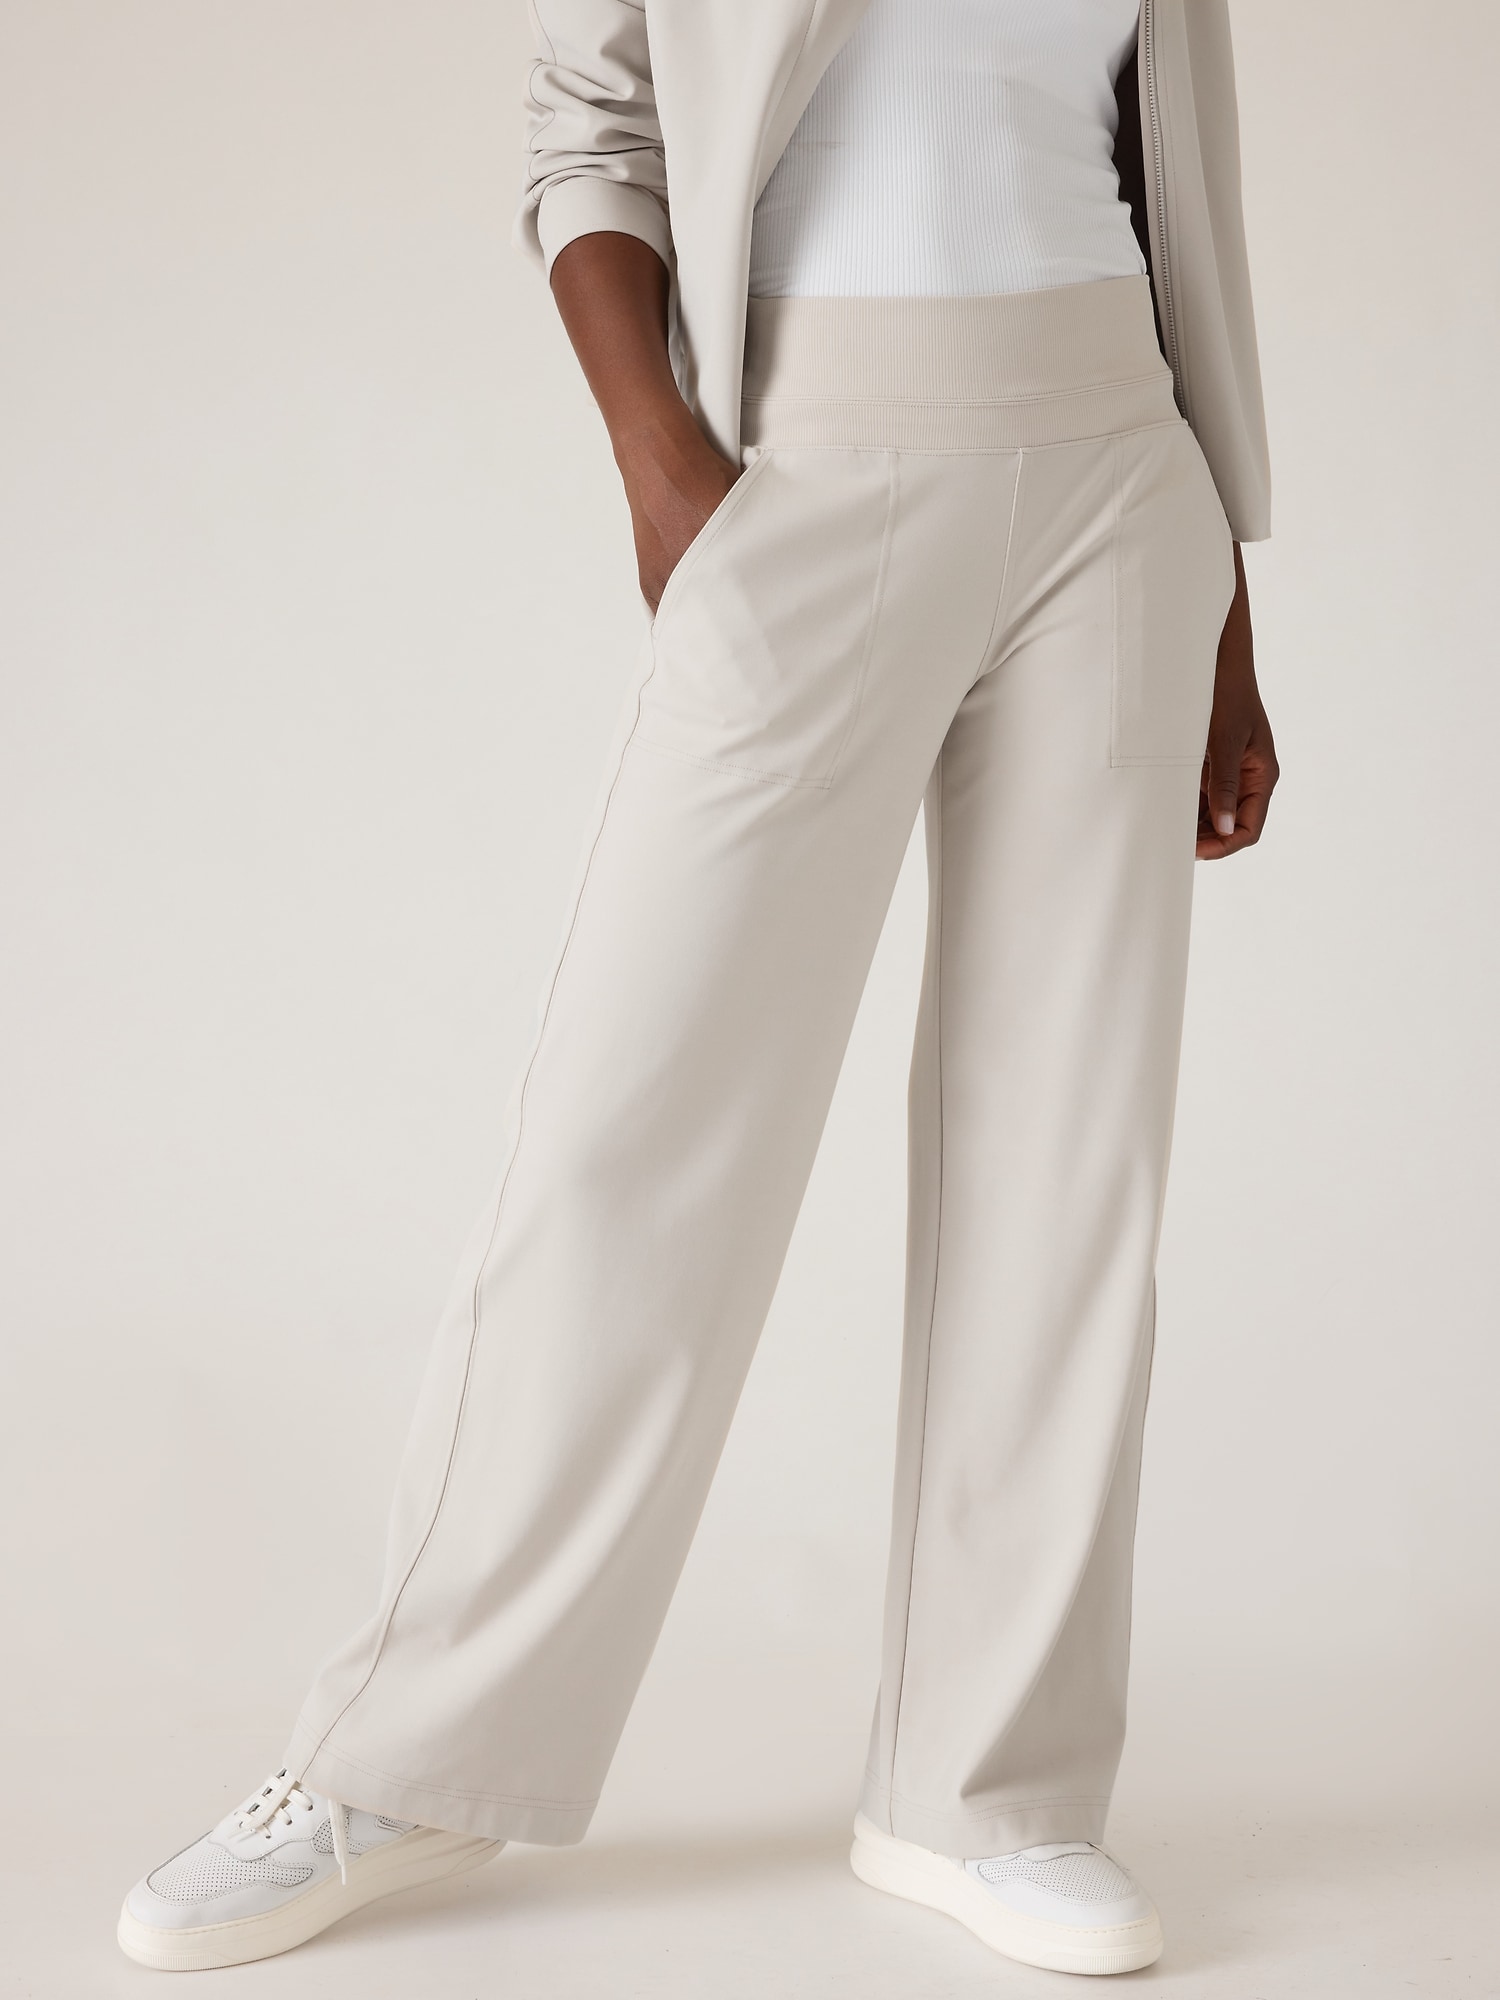 The first pair of wide-leg pants is great for those with narrower hips, pants